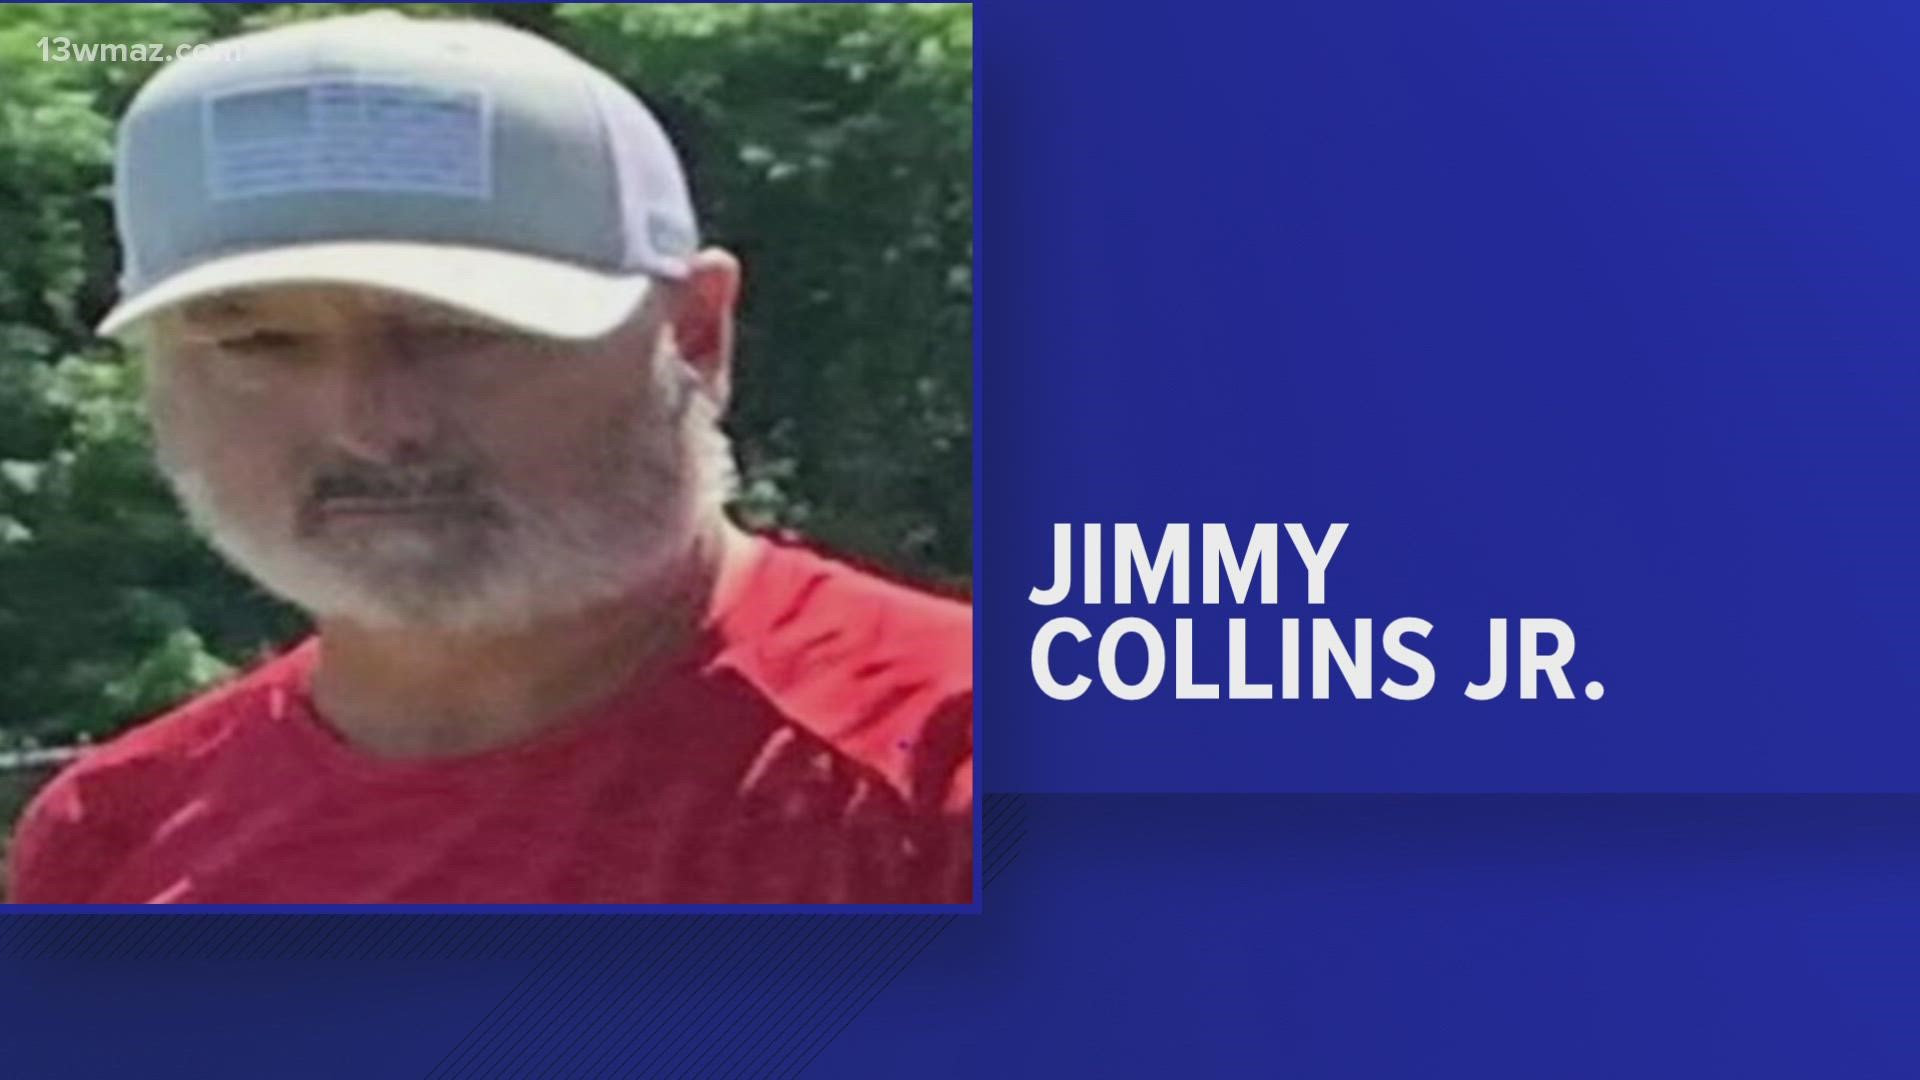 According to the Allen Parish Sheriff's Office, Jimmy Collins Jr., 55, was arrested Monday morning on six felony warrants for fraud and swindling.